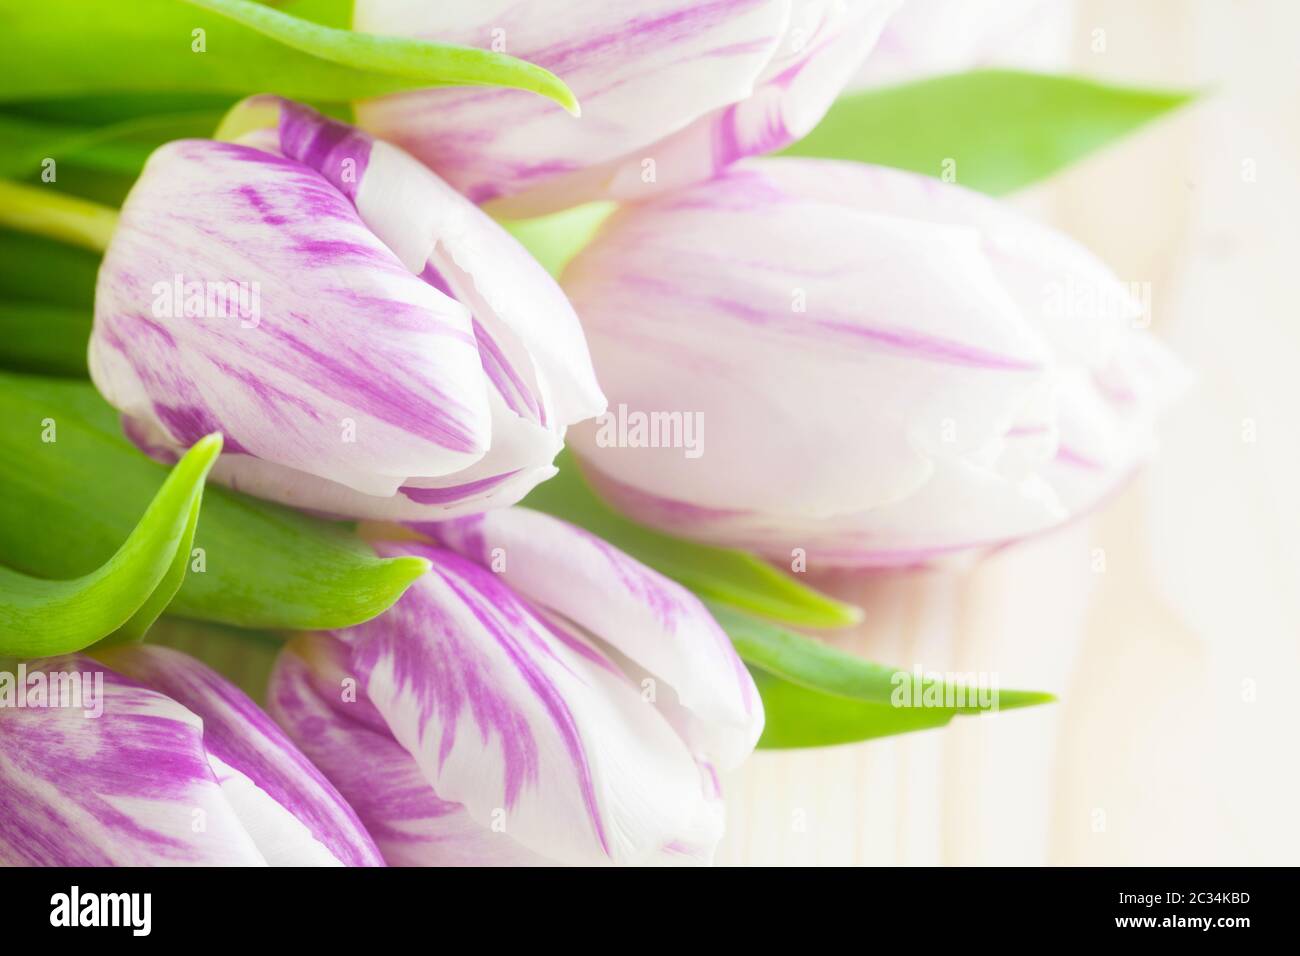 Purple And White Tulips On A Light Background Stock Photo